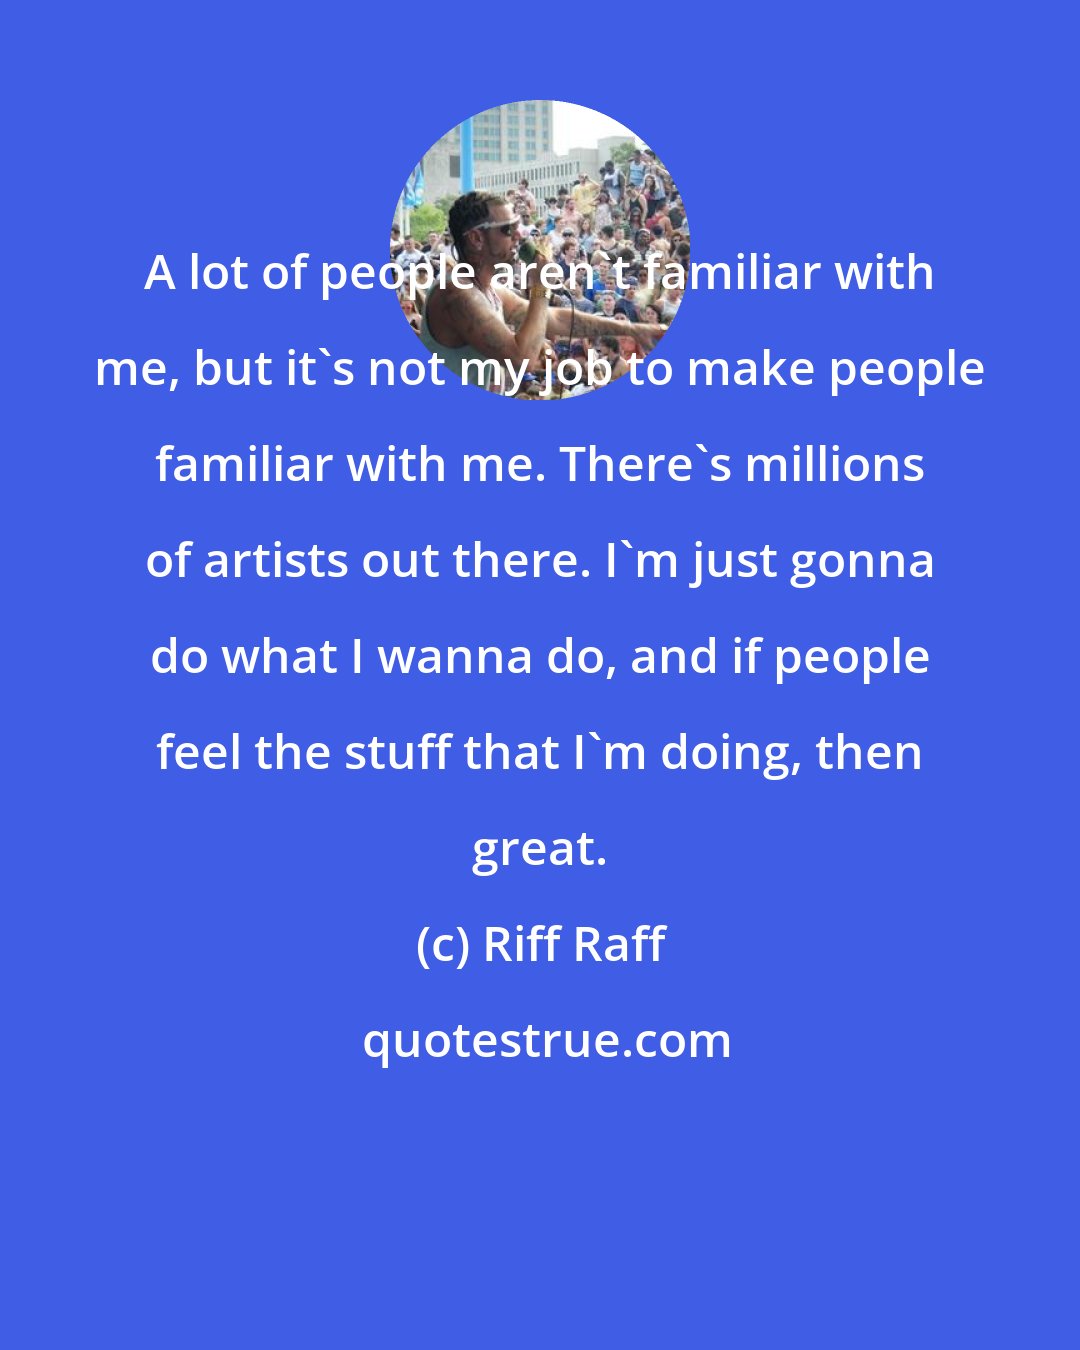 Riff Raff: A lot of people aren't familiar with me, but it's not my job to make people familiar with me. There's millions of artists out there. I'm just gonna do what I wanna do, and if people feel the stuff that I'm doing, then great.